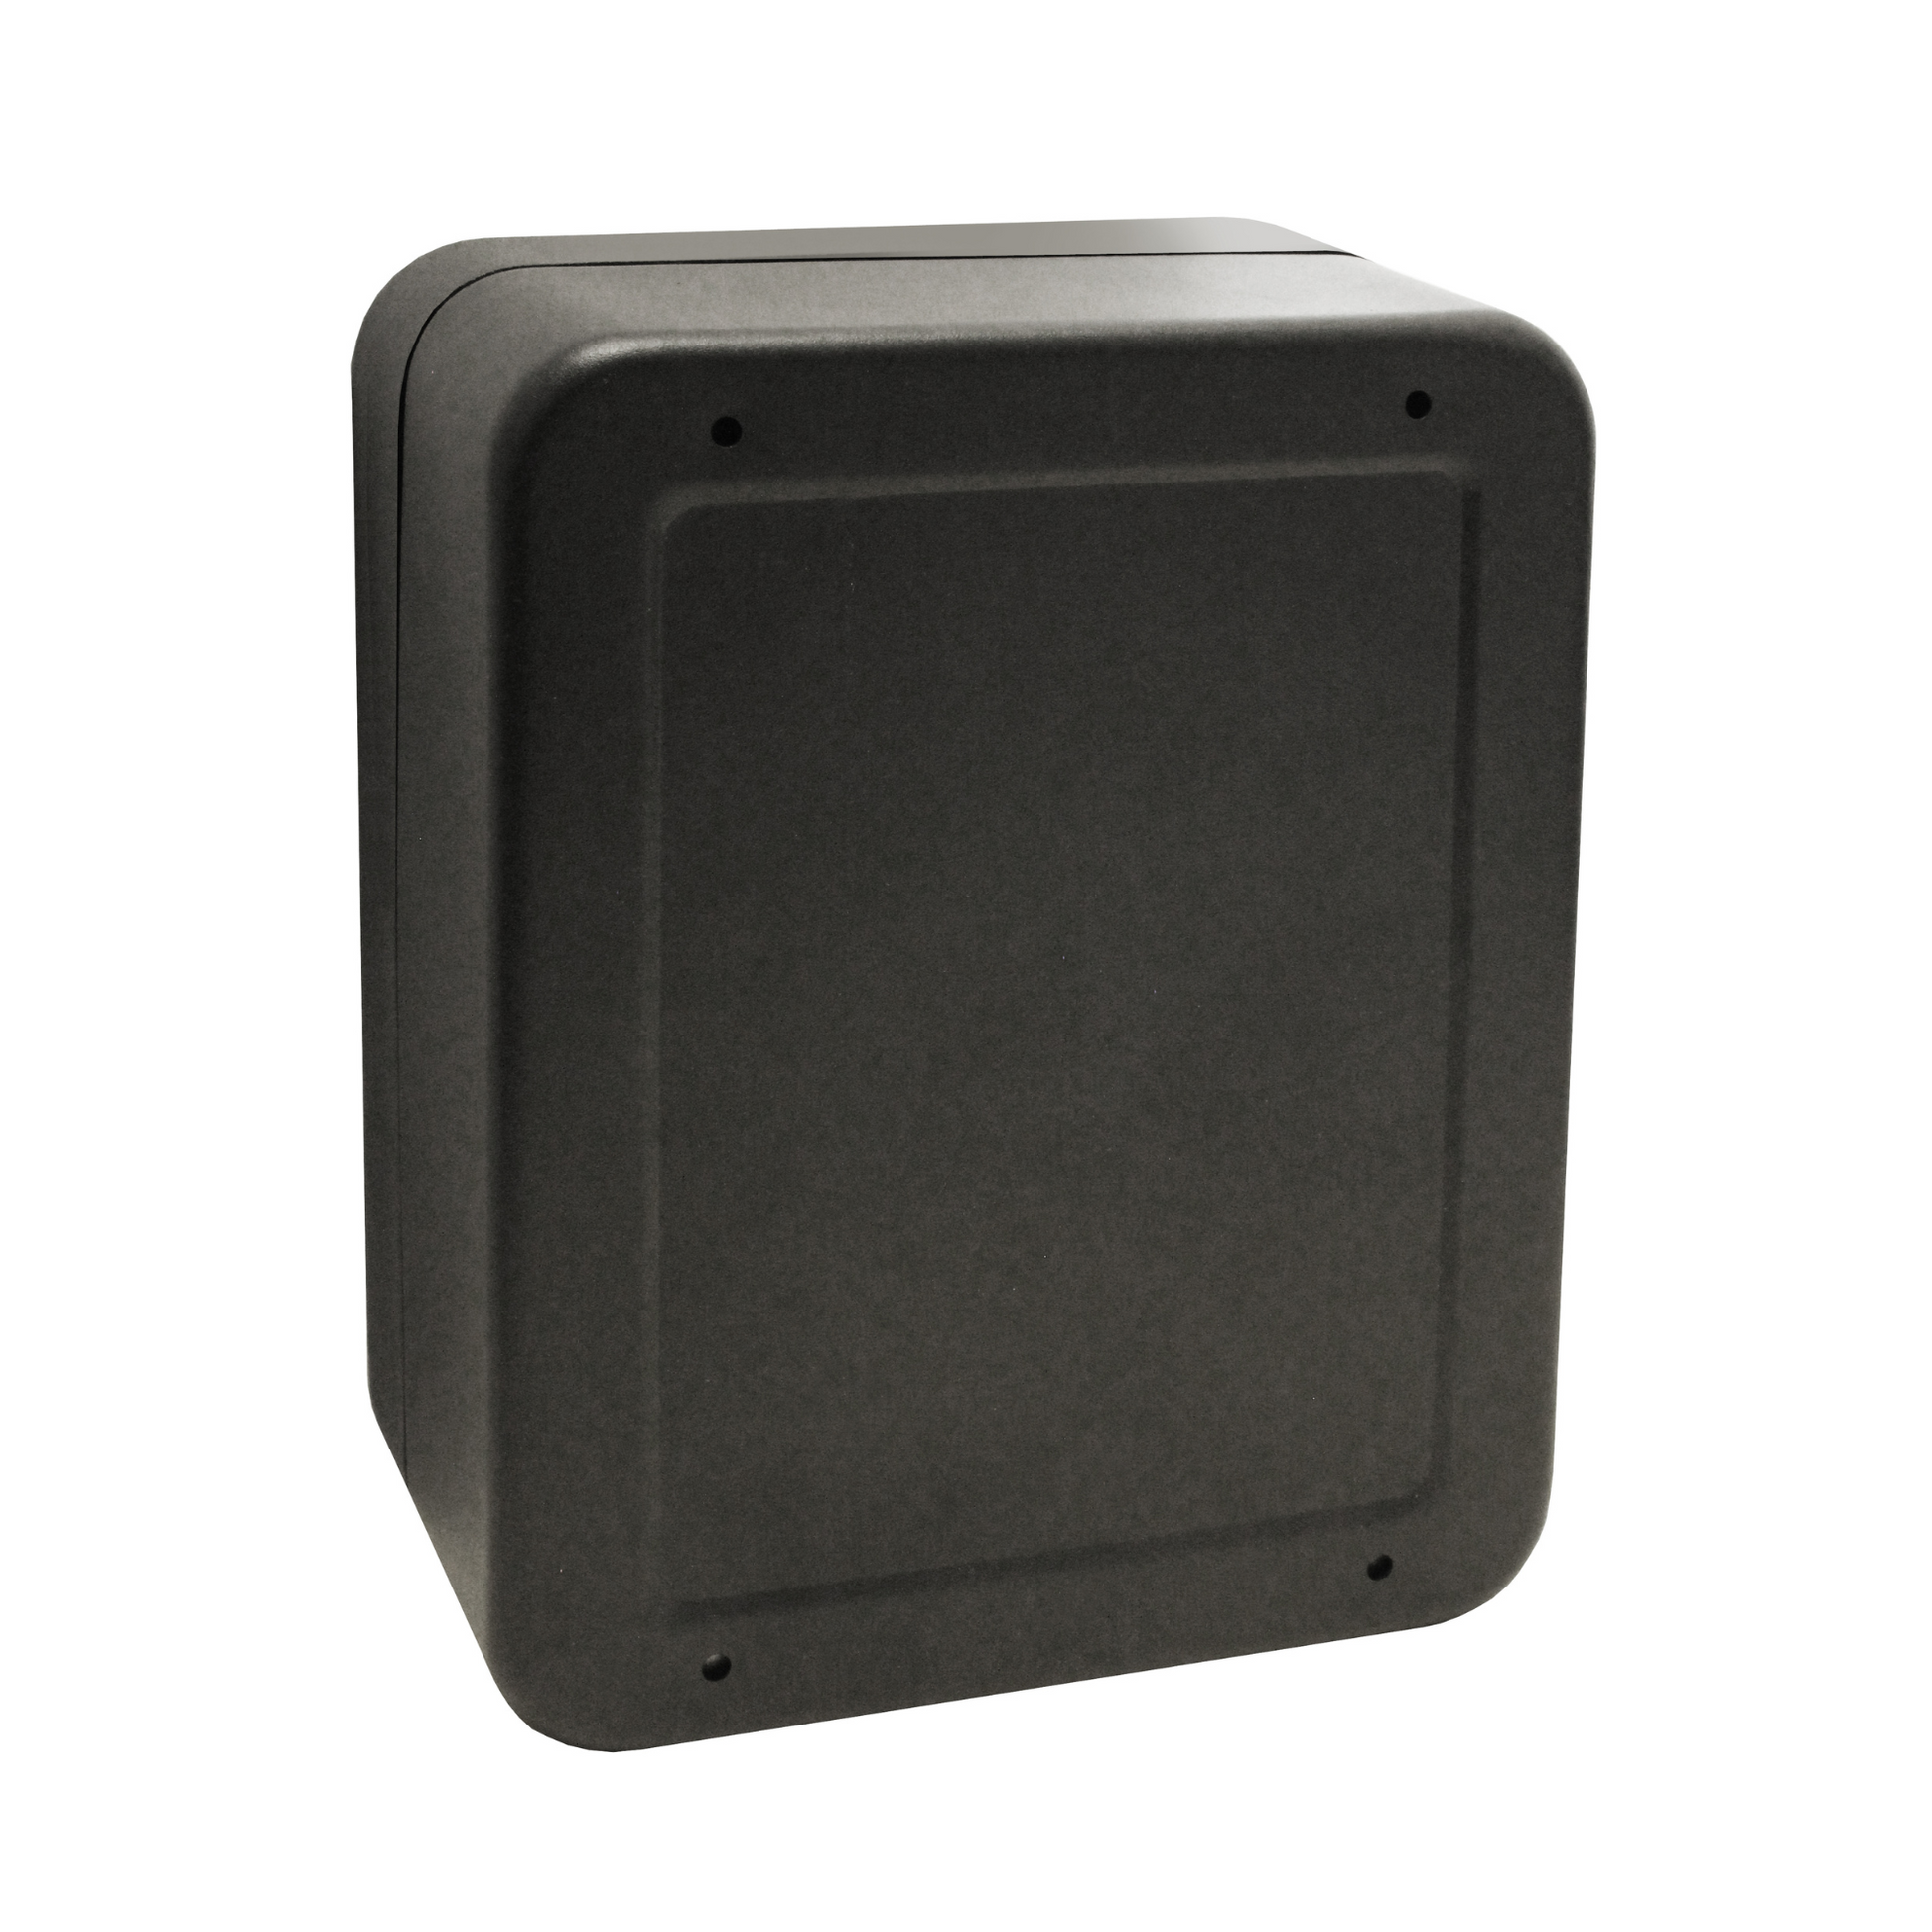 Rear of a wall-mounted cigarette ash bin in matte black with a smooth finish and rounded corners, showing mounting holes.